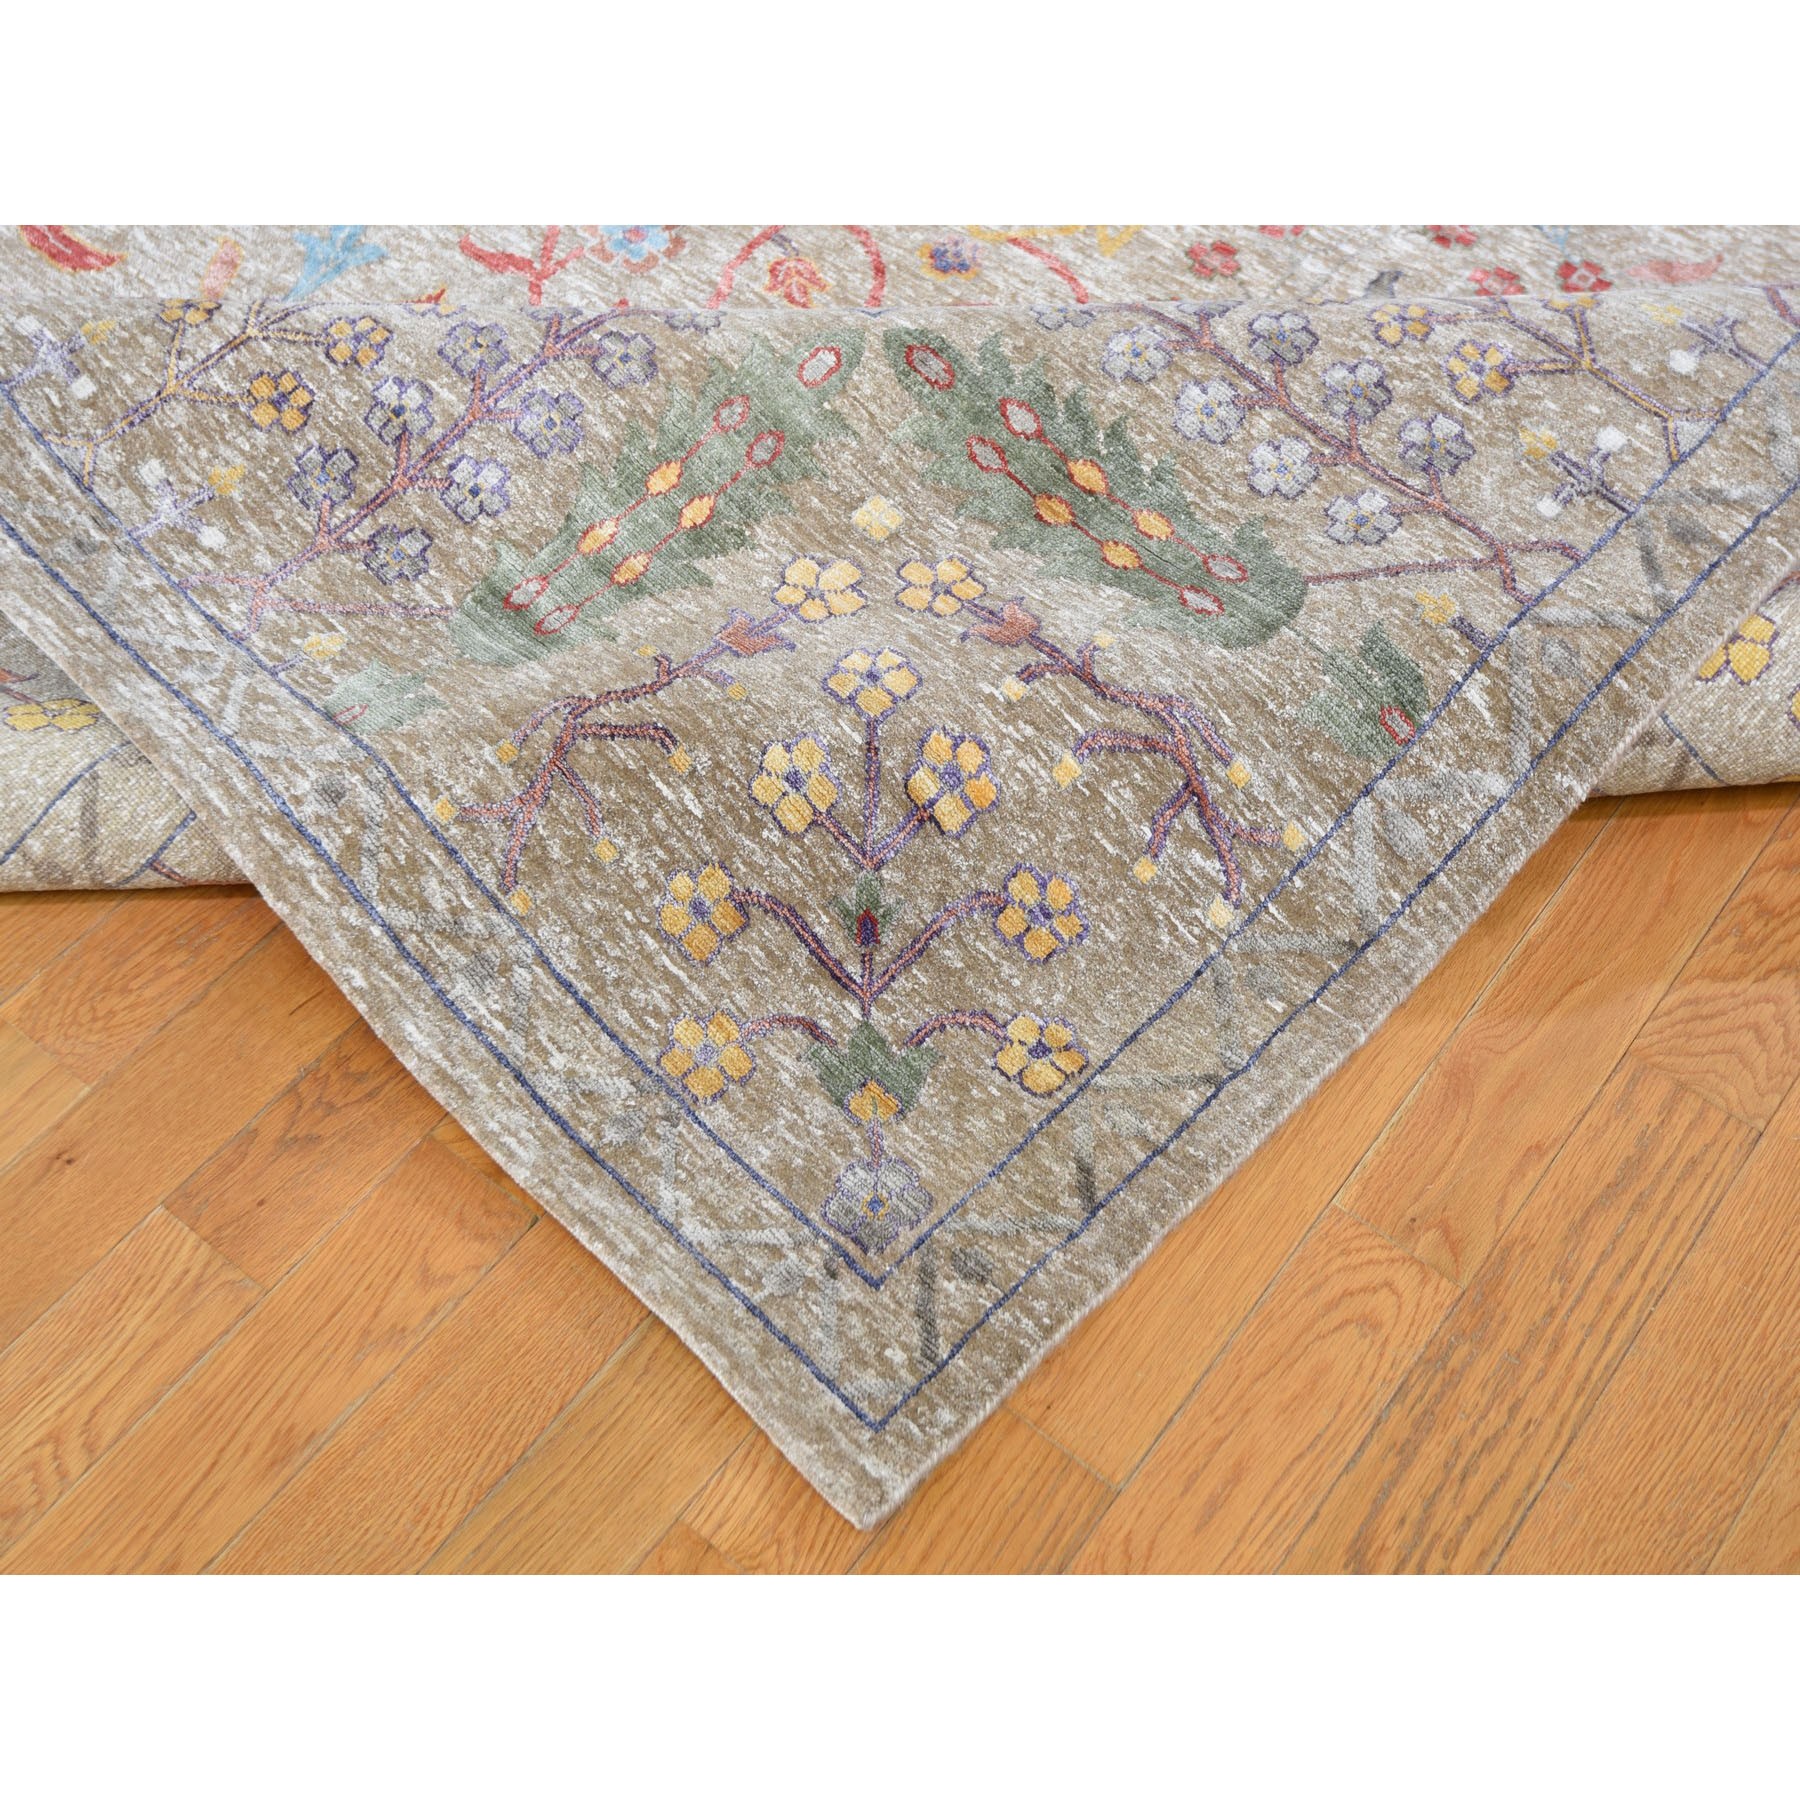 12-x14-10  Oversized Honey Brown Silk With Textured wool vaze Design Hand Knotted Oriental Rug 